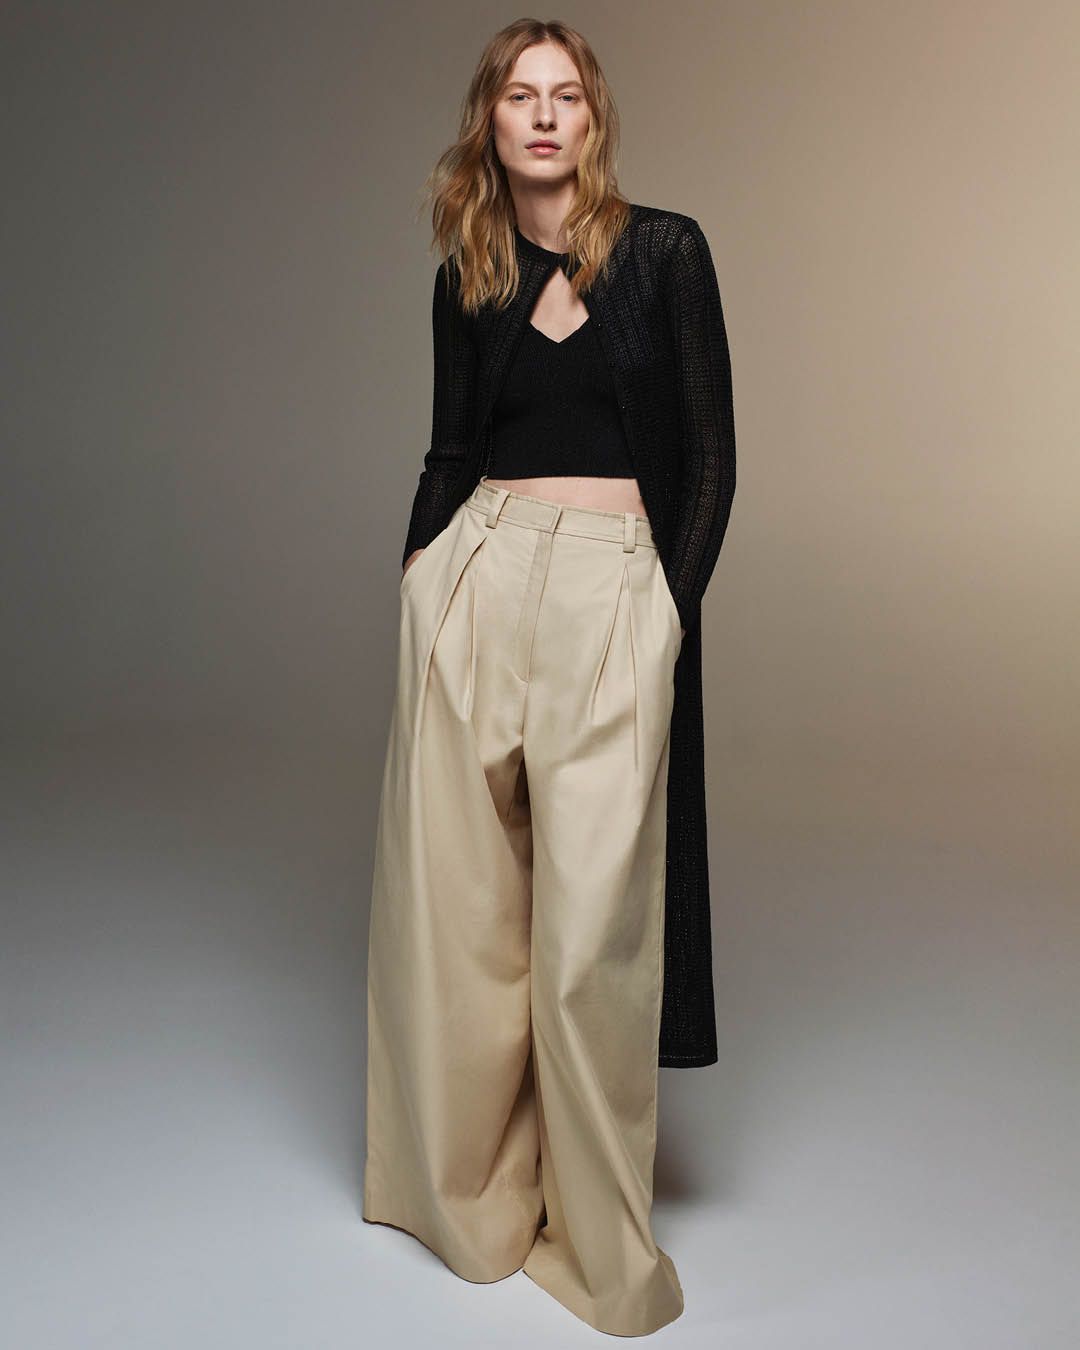 Julia Nobis standing with hands in pockets wearing a matching black singlet and cardigan with beige trousers